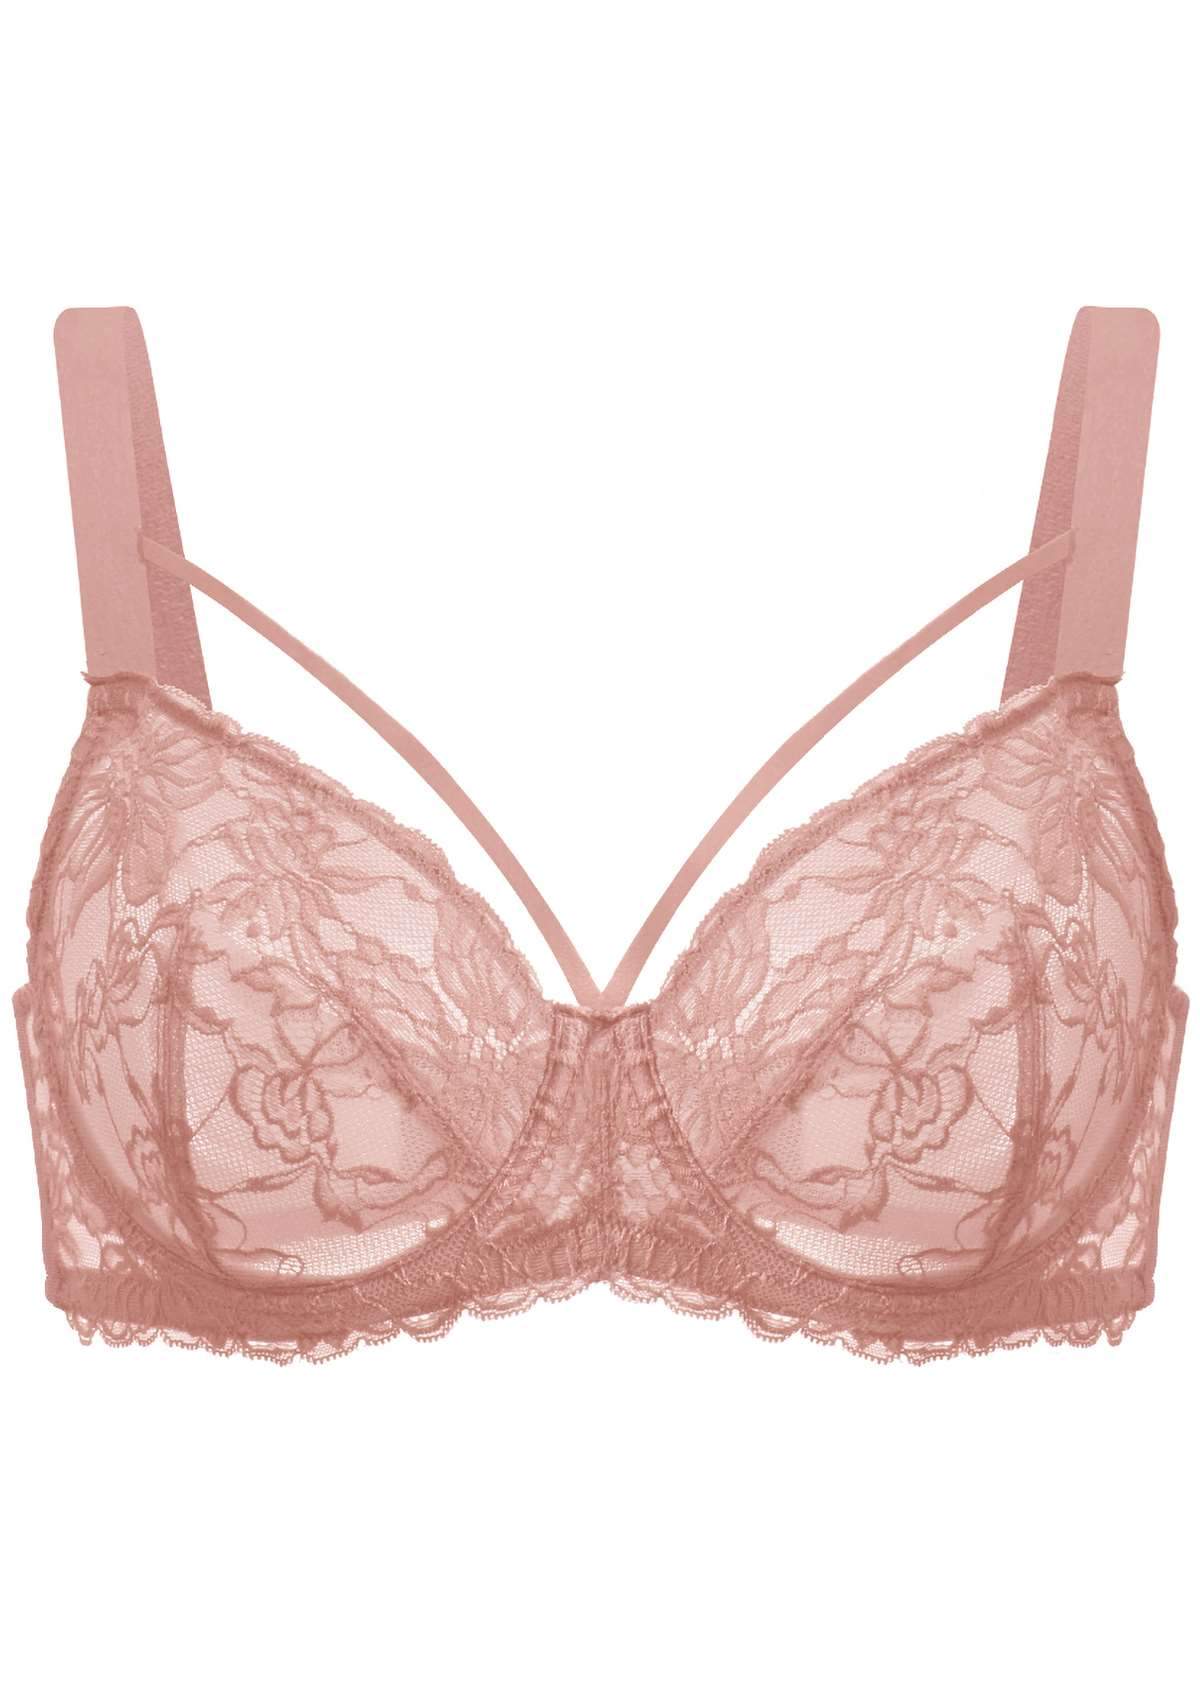 HSIA Pretty In Petals Lace Bra And Panty Sets: Bra For Big Boobs - Light Coral / 34 / D